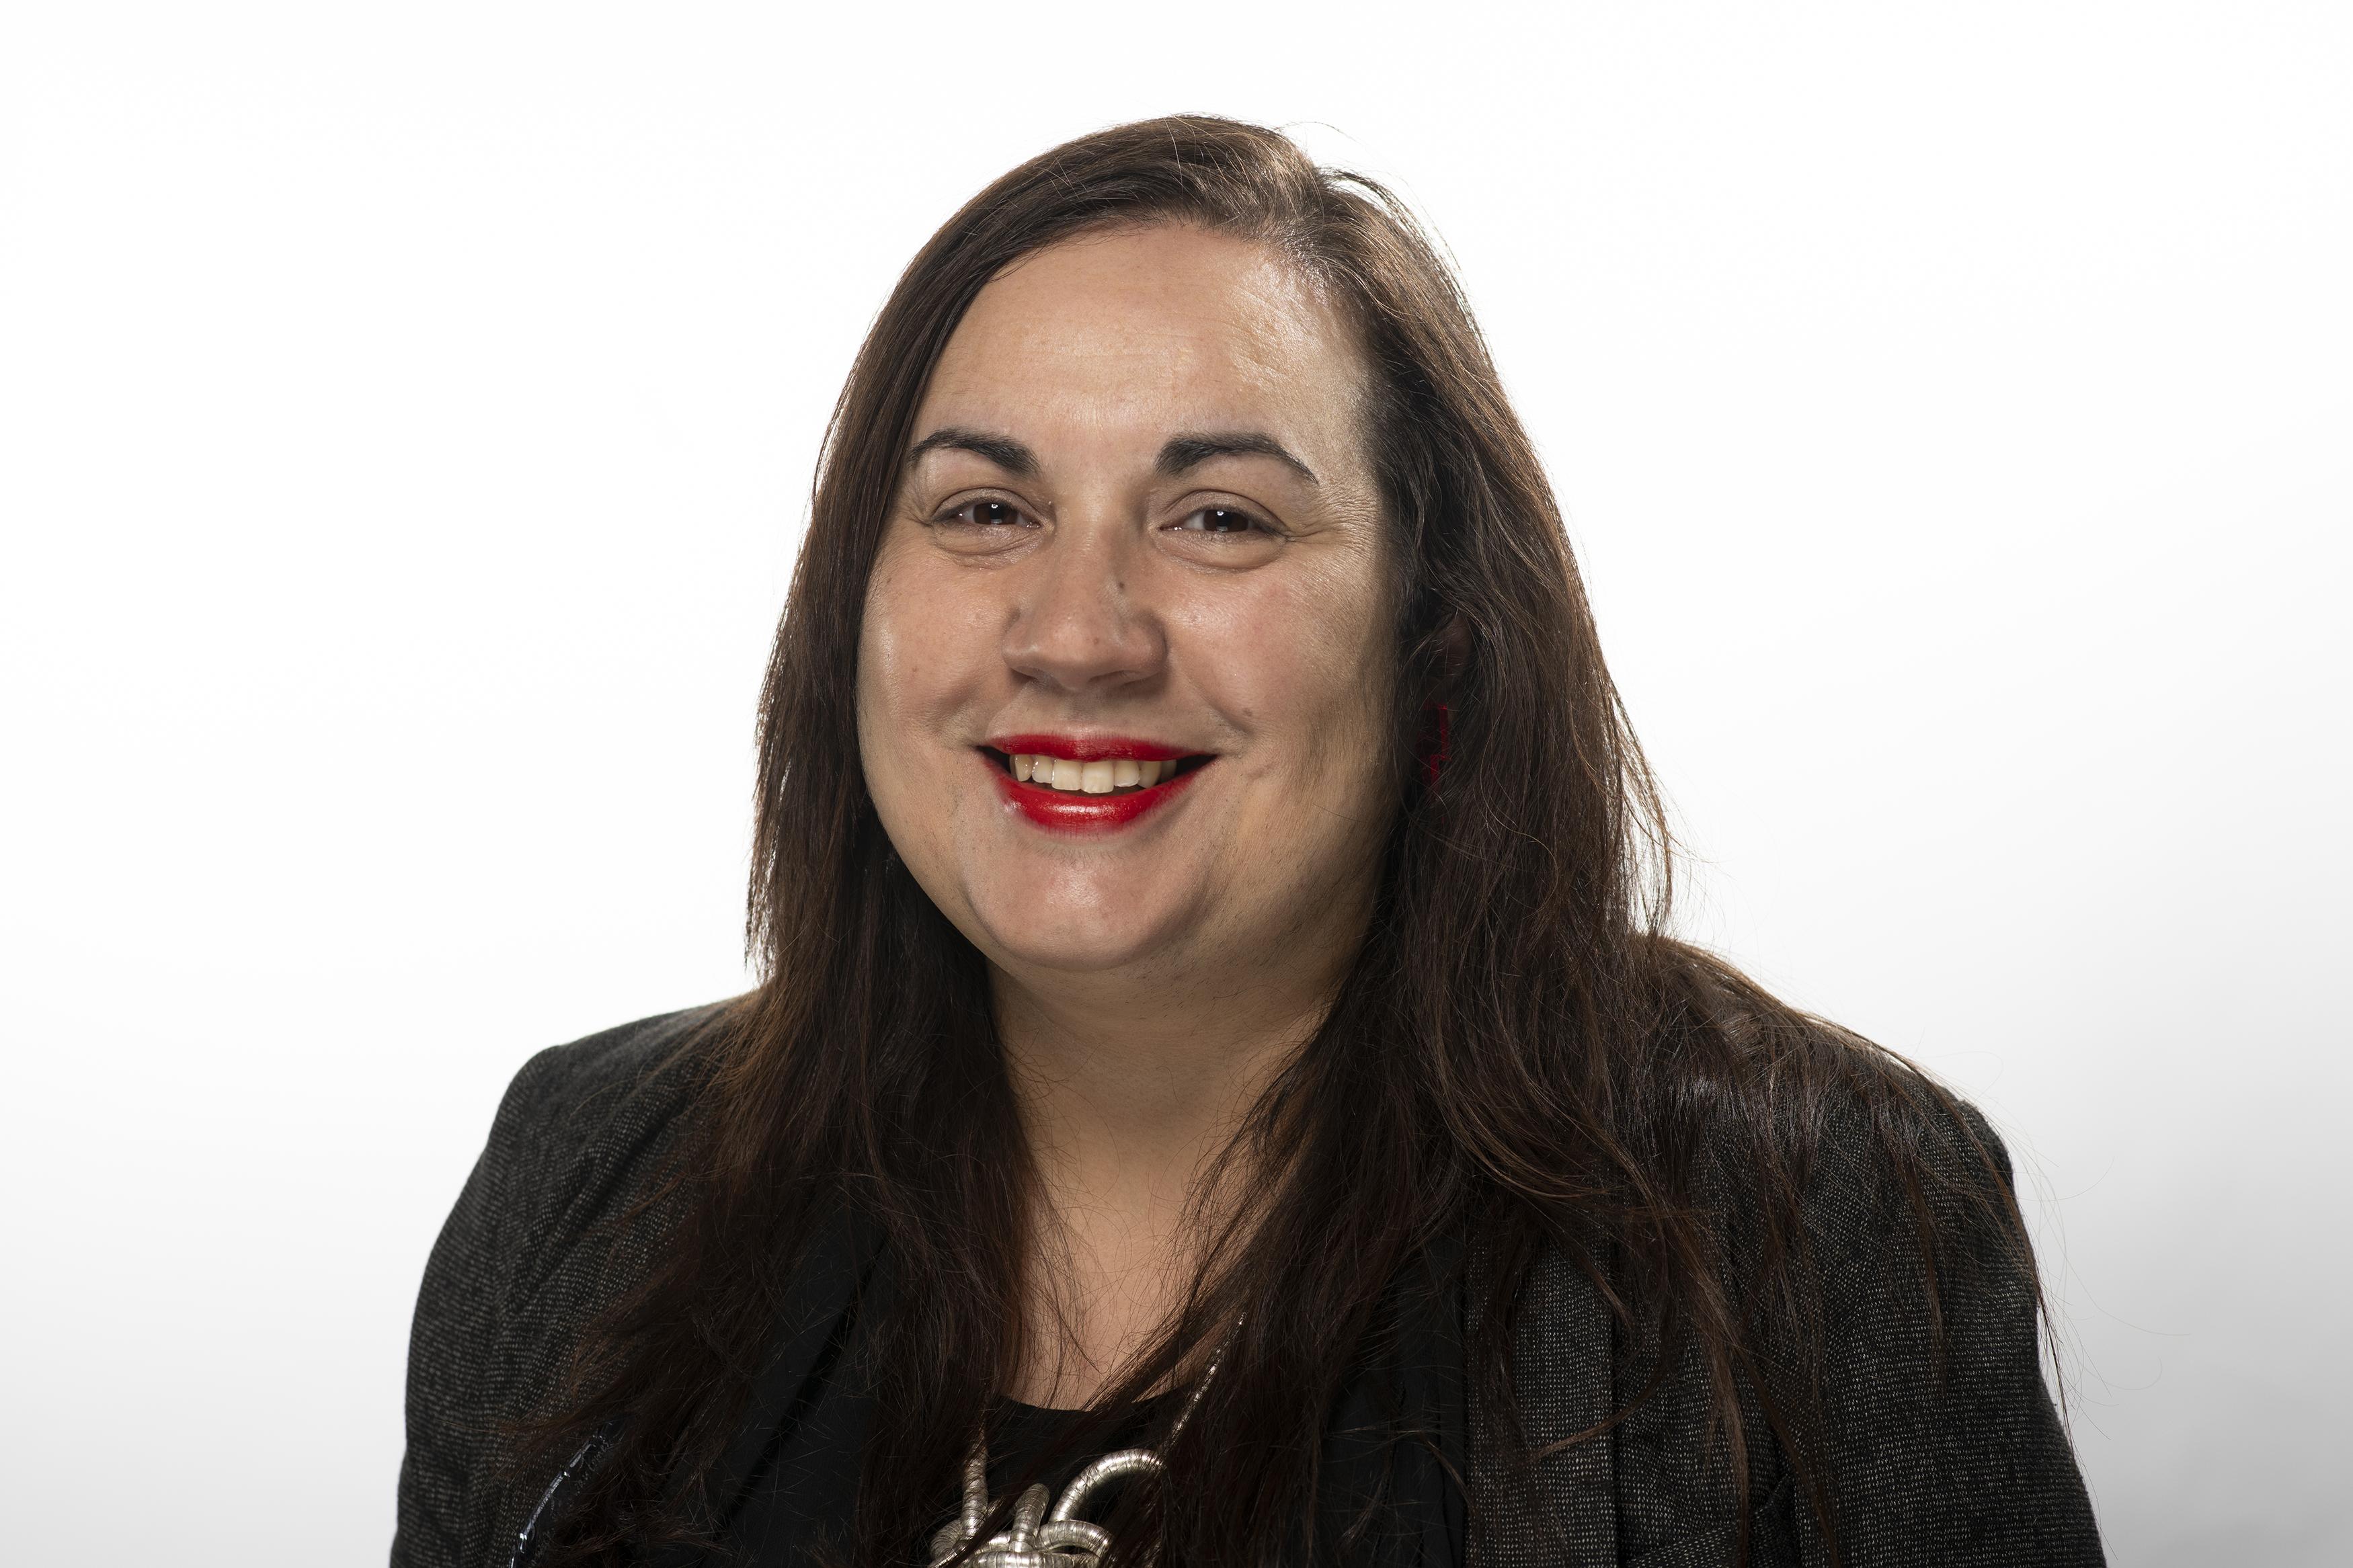 Picture of Cllr Lucia das Neves, Haringey Council's Cabinet Member for Health, Social Care and Wellbeing